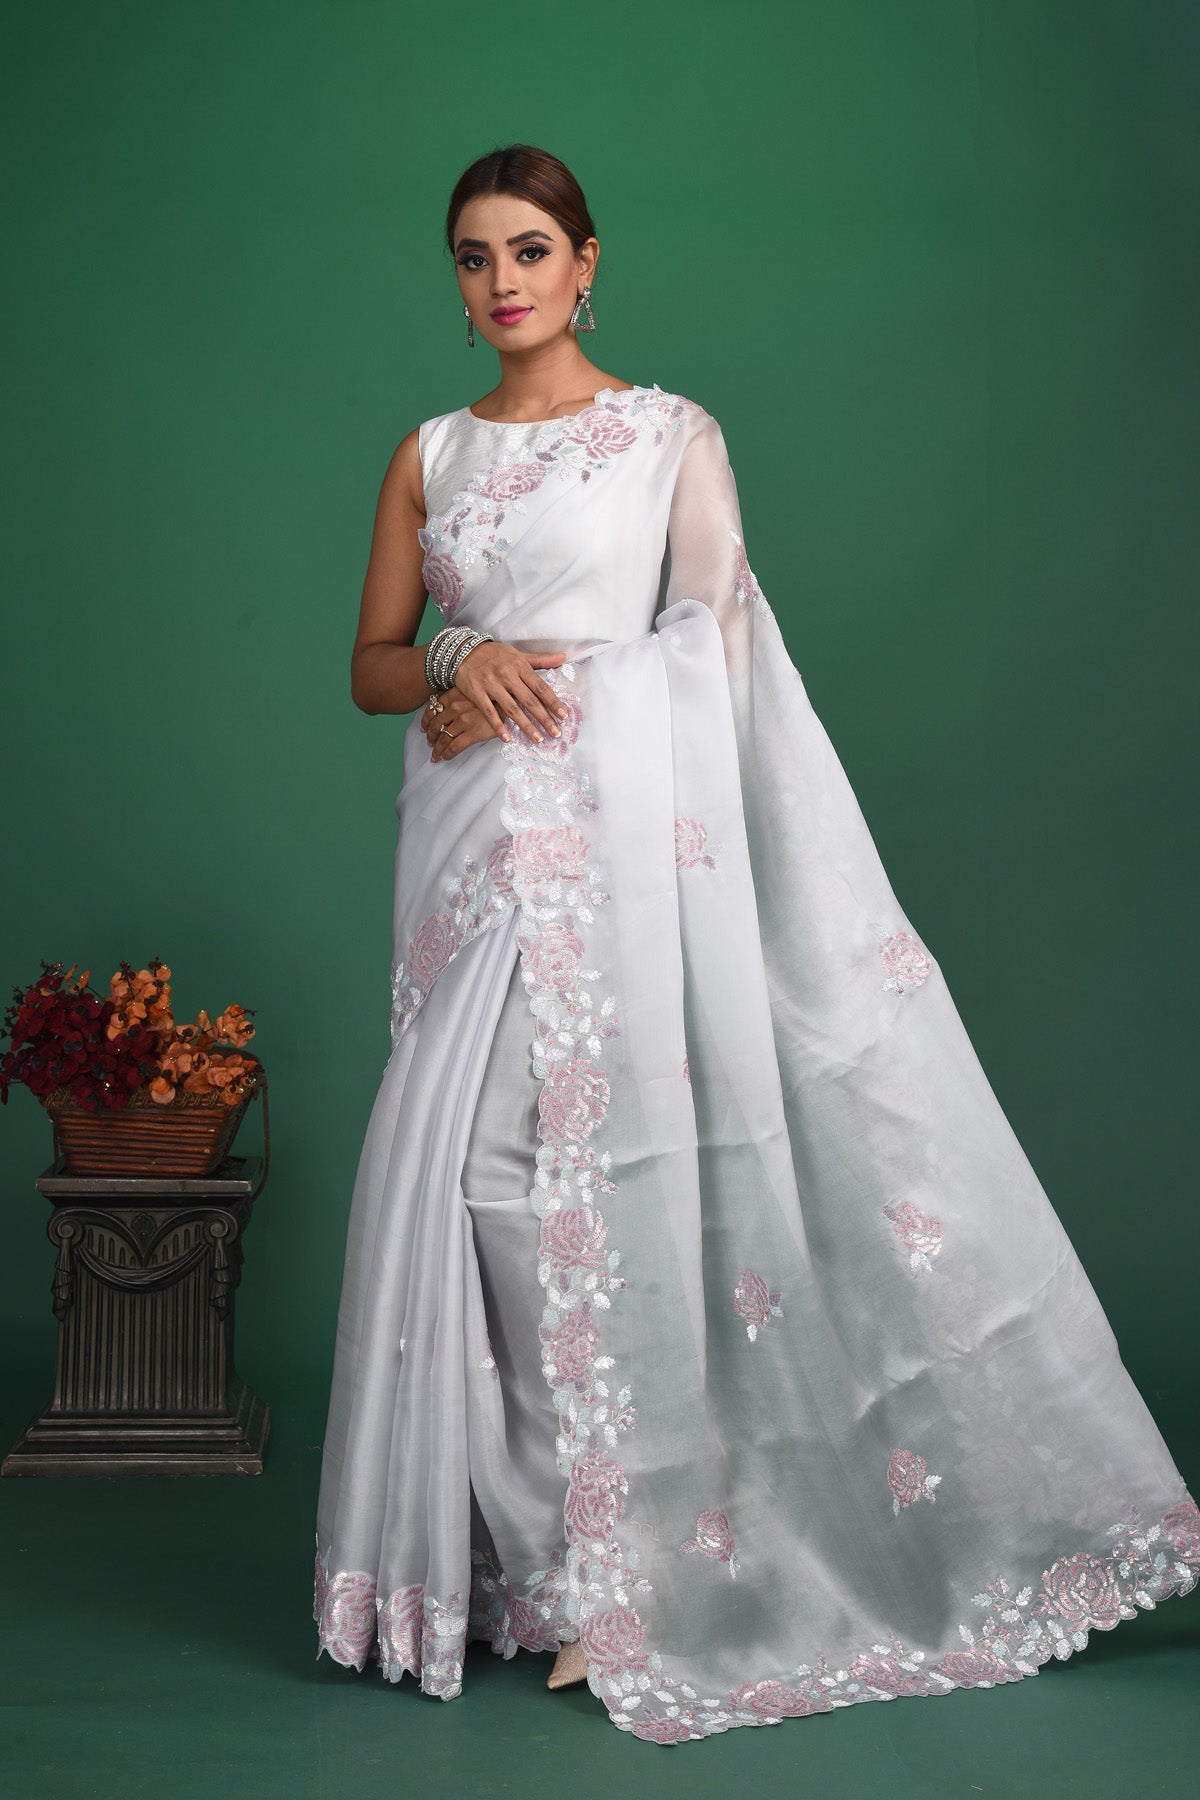 Buy stunning white embroidered organza saree online in USA. Be a vision of style and elegance at parties and special occasions in beautiful designer sarees, embroidered sarees, printed sarees, satin saris from Pure Elegance Indian fashion store in USA.-full view